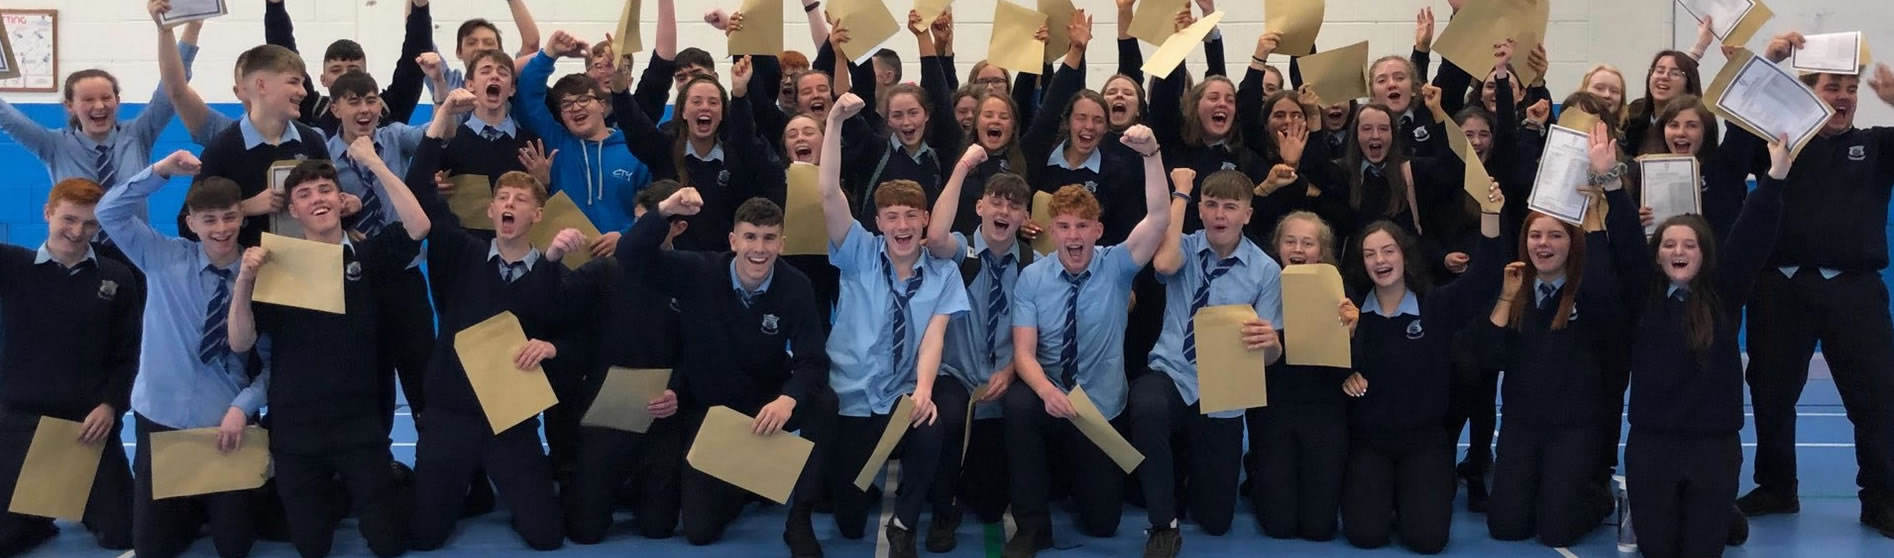 St Catherine's VS Pupils holding up exam results